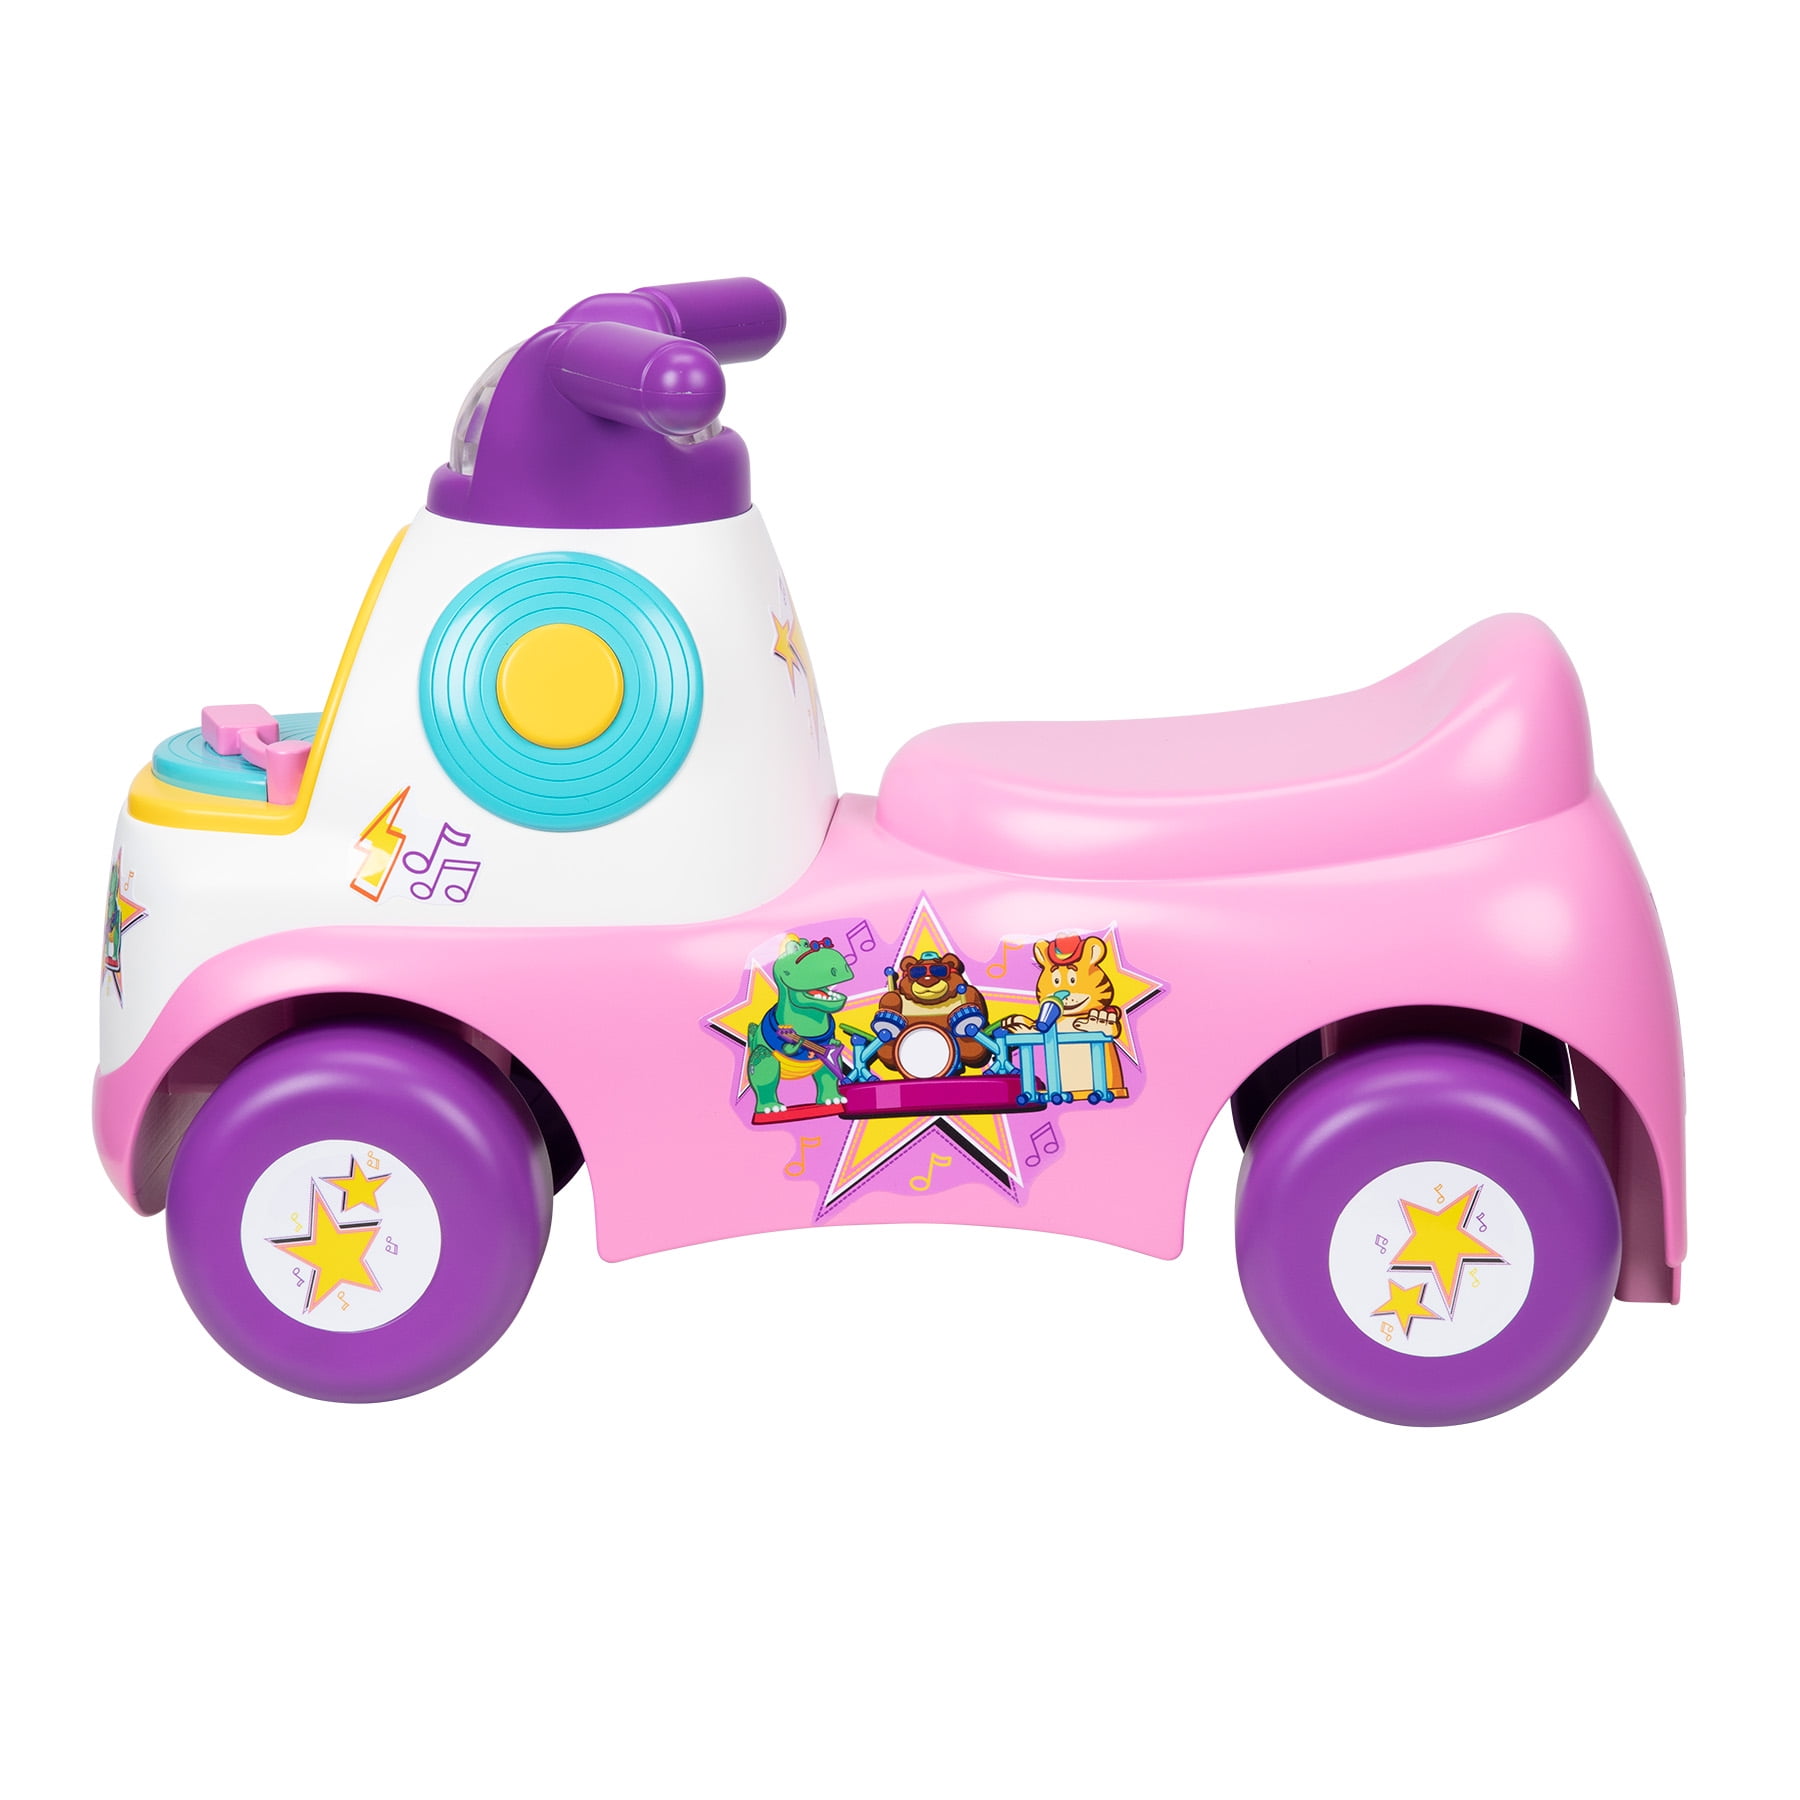 Little People Fisher-Price Movin’ n Groovin Pink Ride-On with Lights and Sounds - 3